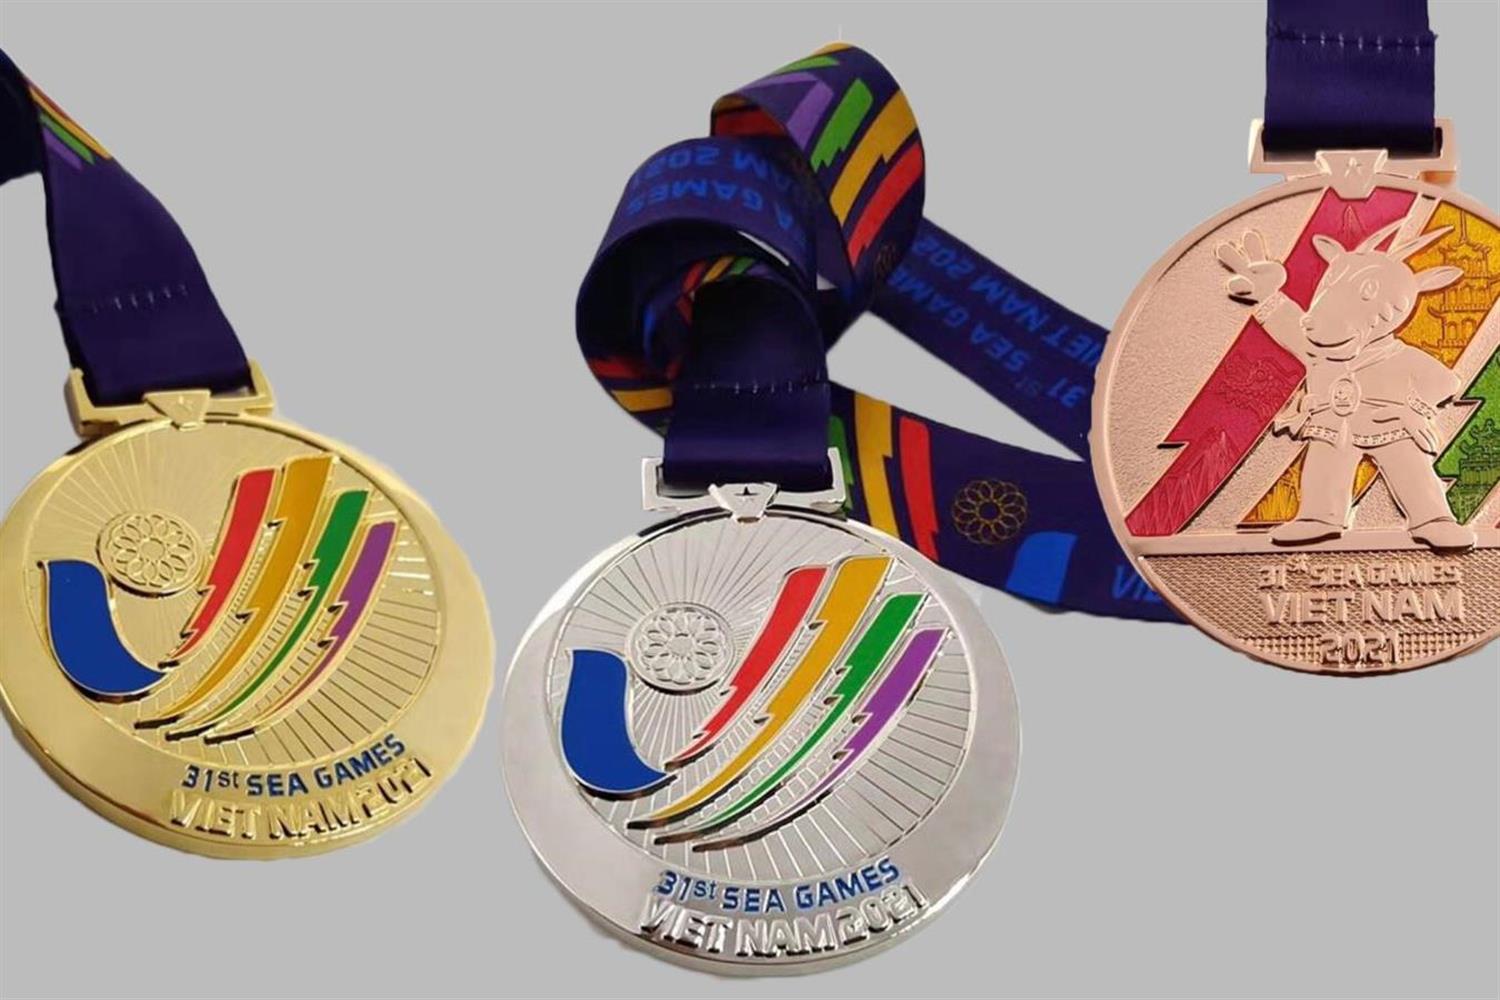 Vietnam starts making 4,000 medals for coming 31st SEA Games